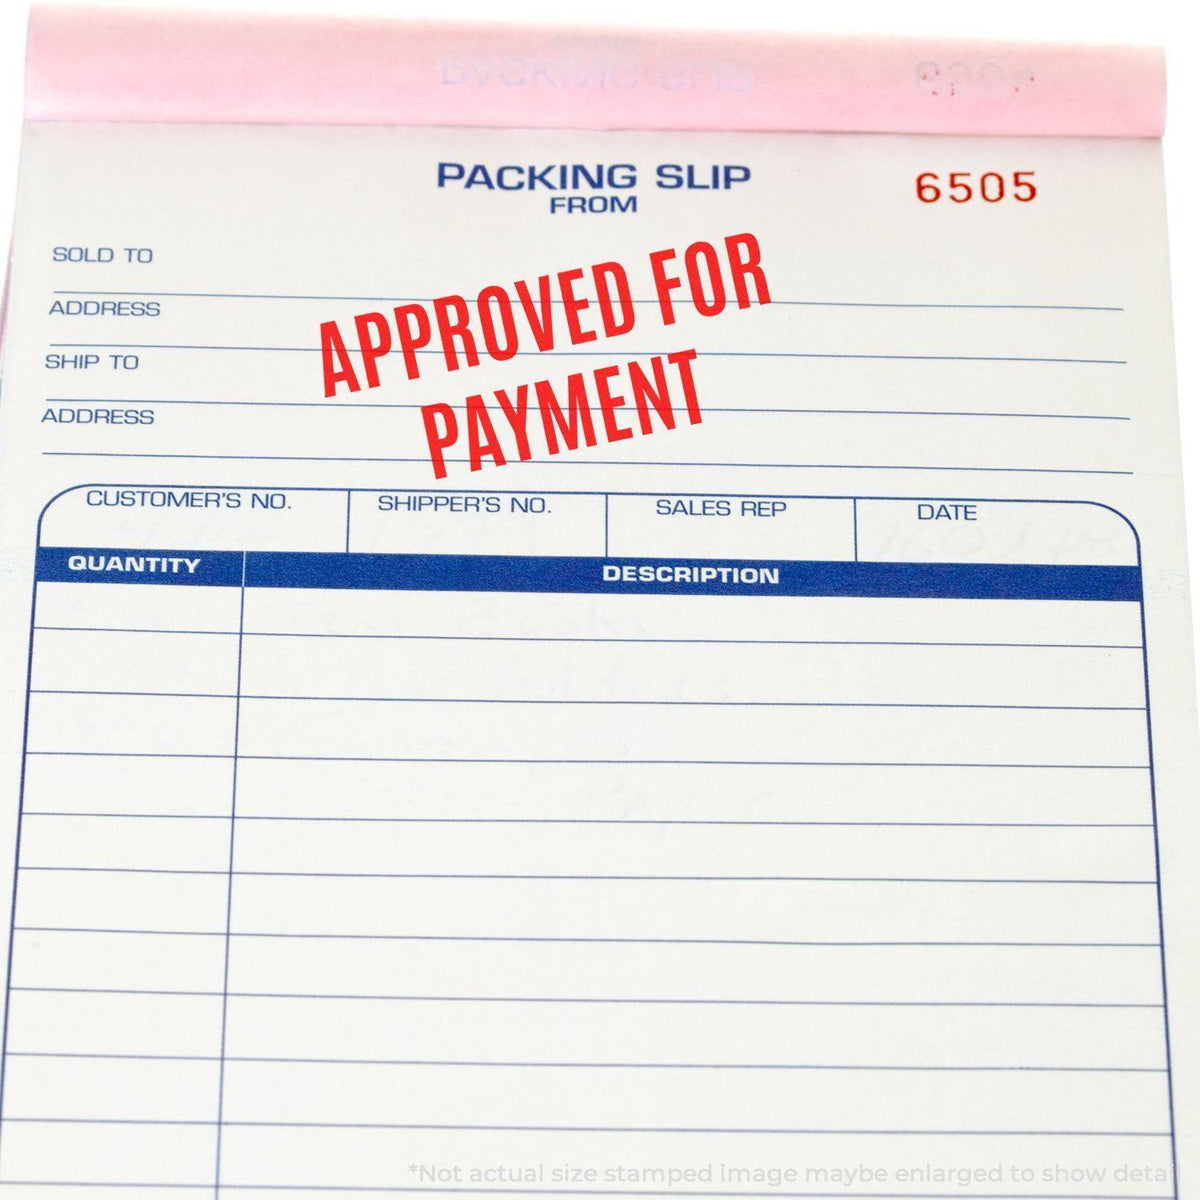 In Use Large Pre-Inked Narrow Font Approved for Payment Stamp Image